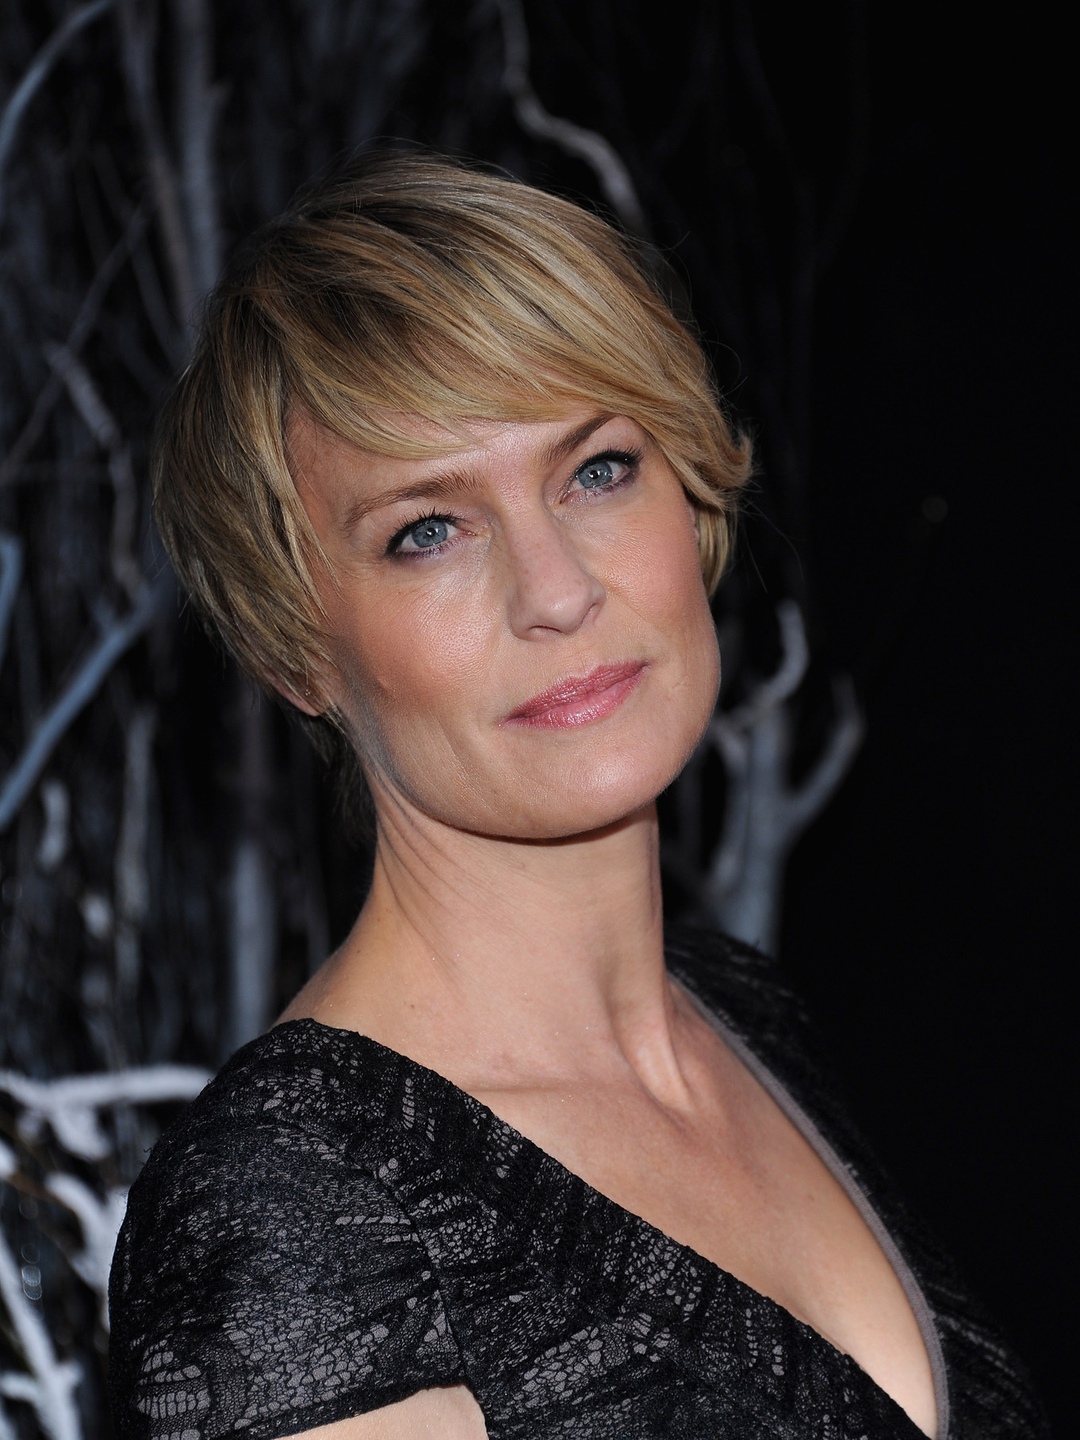 Robin Wright who are her parents